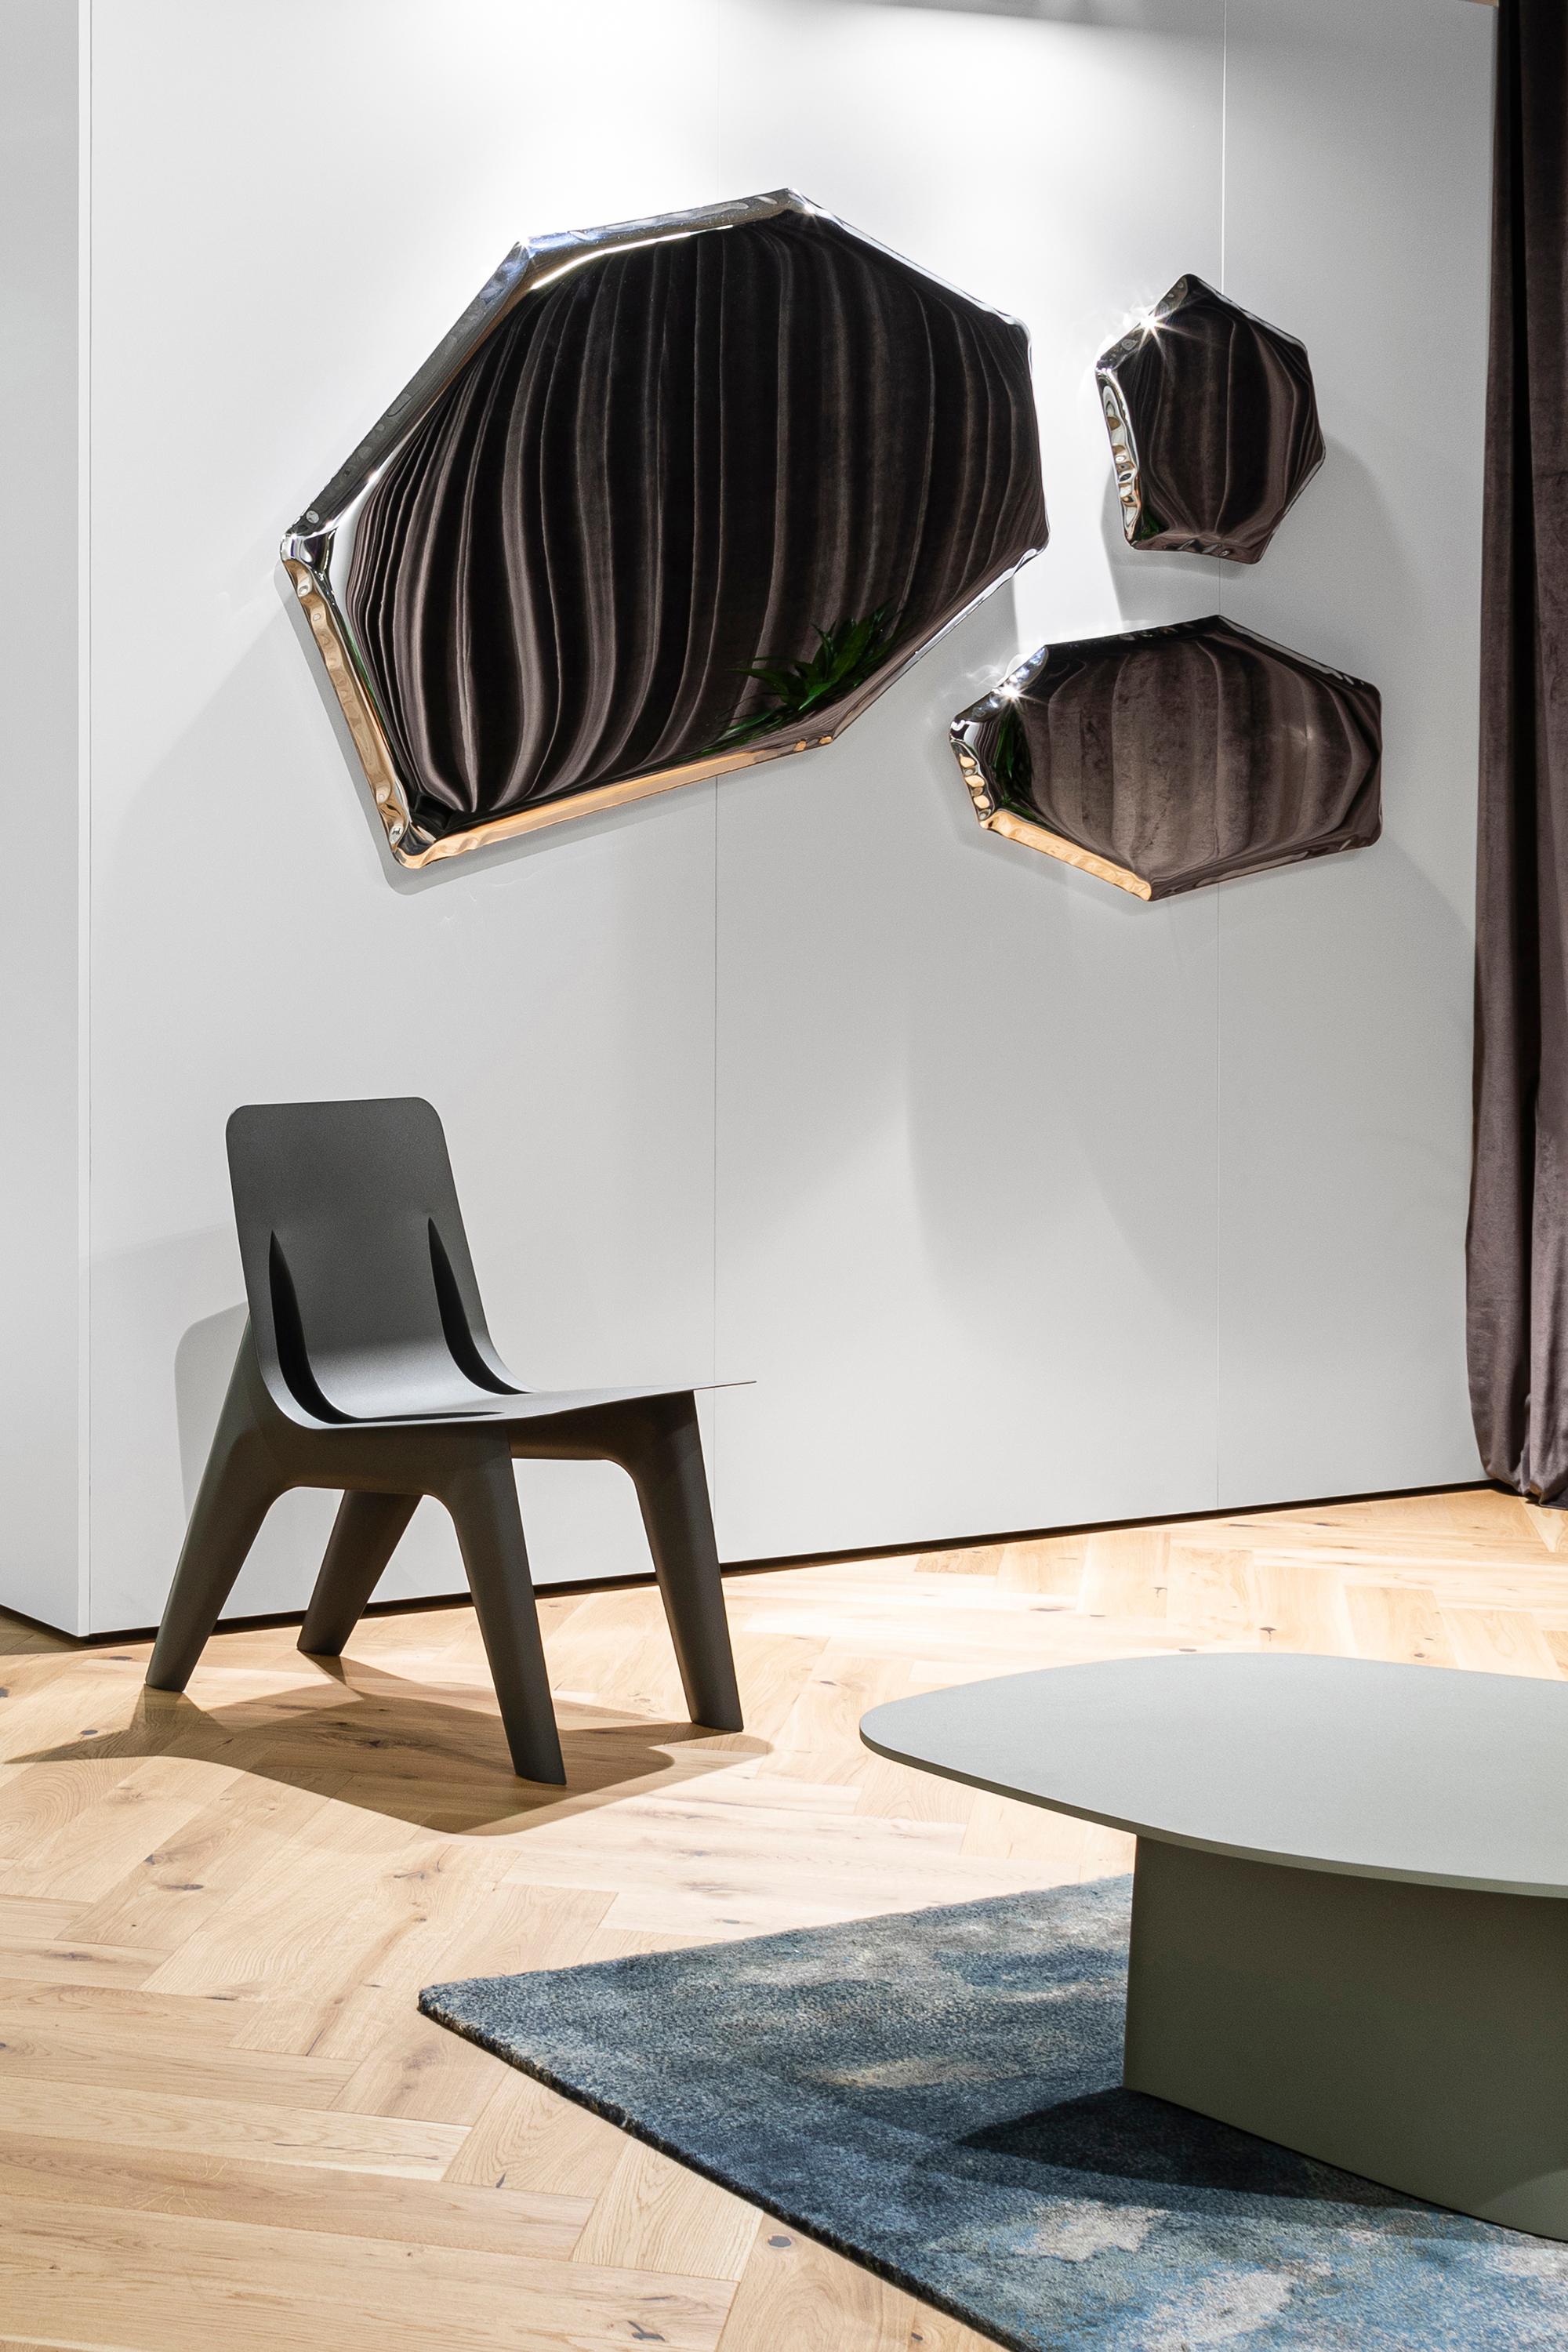 Tafla O series is characterized by smooth, optically light shapes inspired by liquid droplets and thanks to its unique form, combines the world of design, art and technology. Tafla collection is a radical step towards such transformations. Mirrors